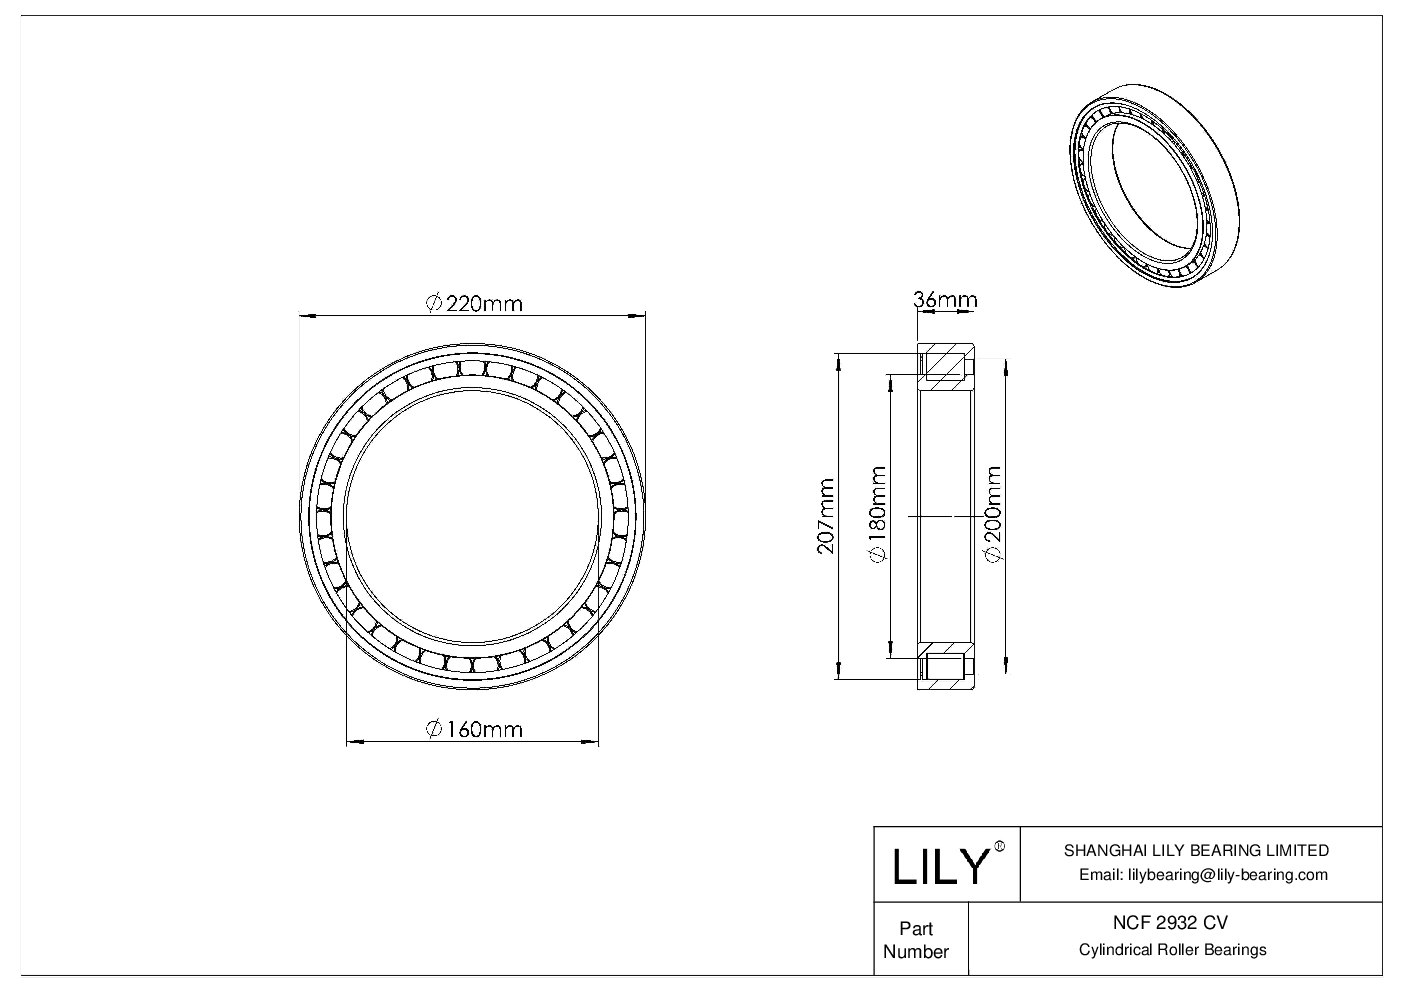 NCF 2932 CV Single Row Full Complement Cylindrical Roller Bearings cad drawing